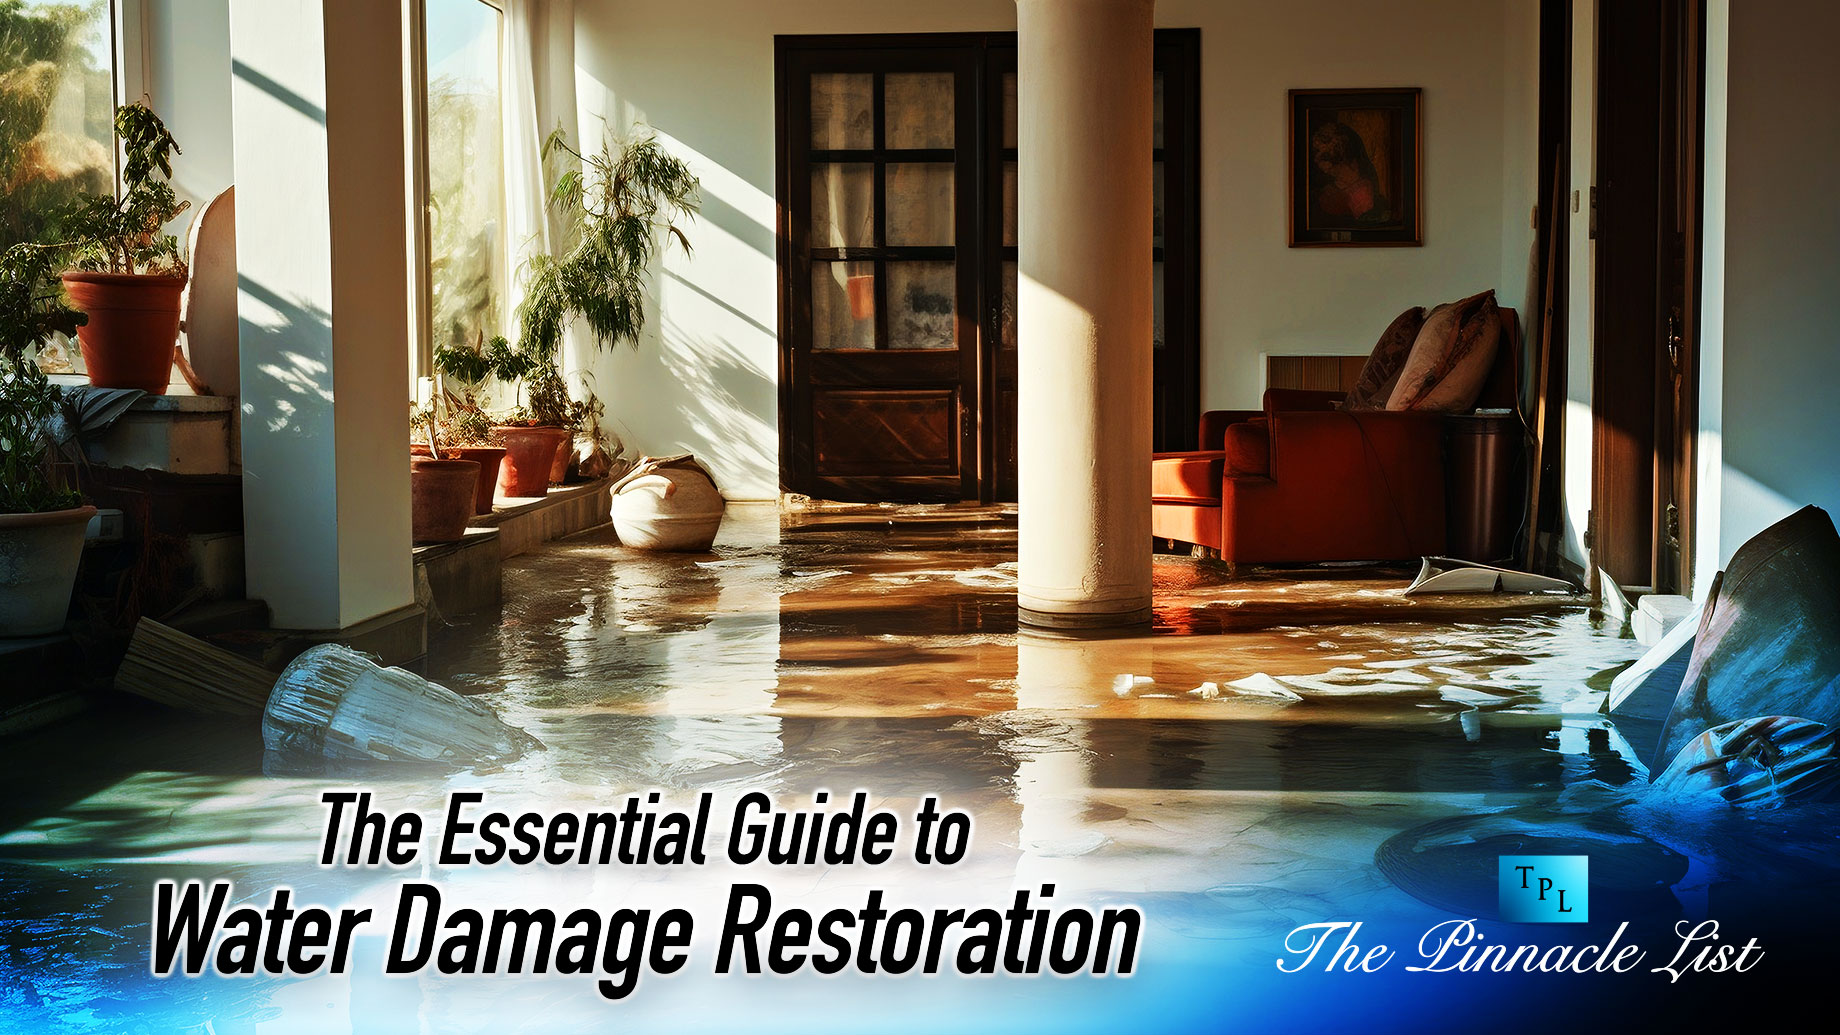 The Essential Guide to Water Damage Restoration